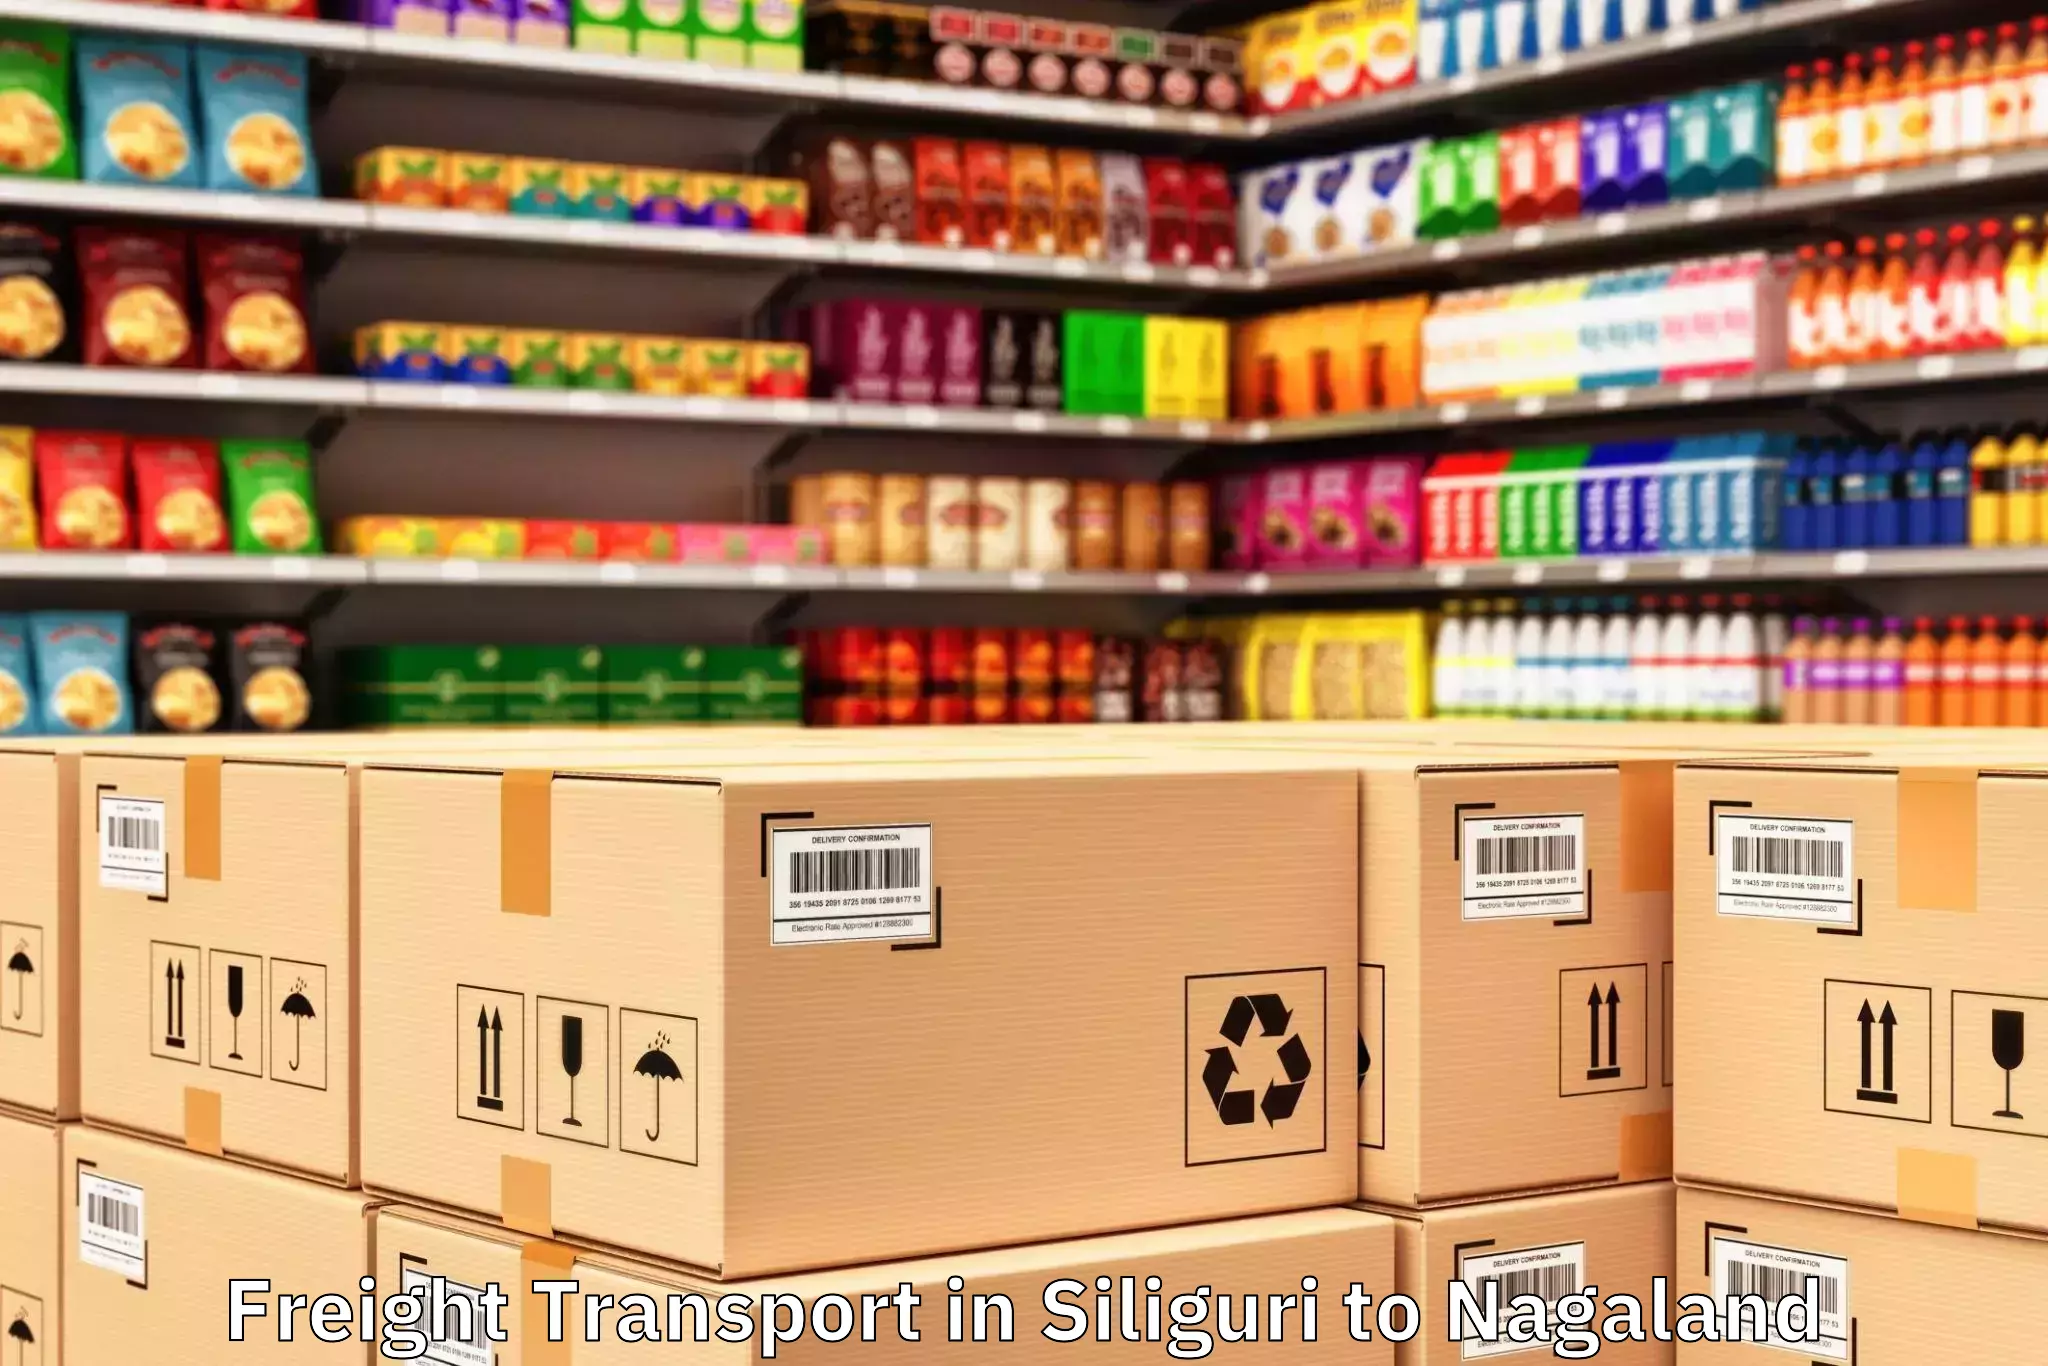 Top Siliguri to Aghunato Freight Transport Available